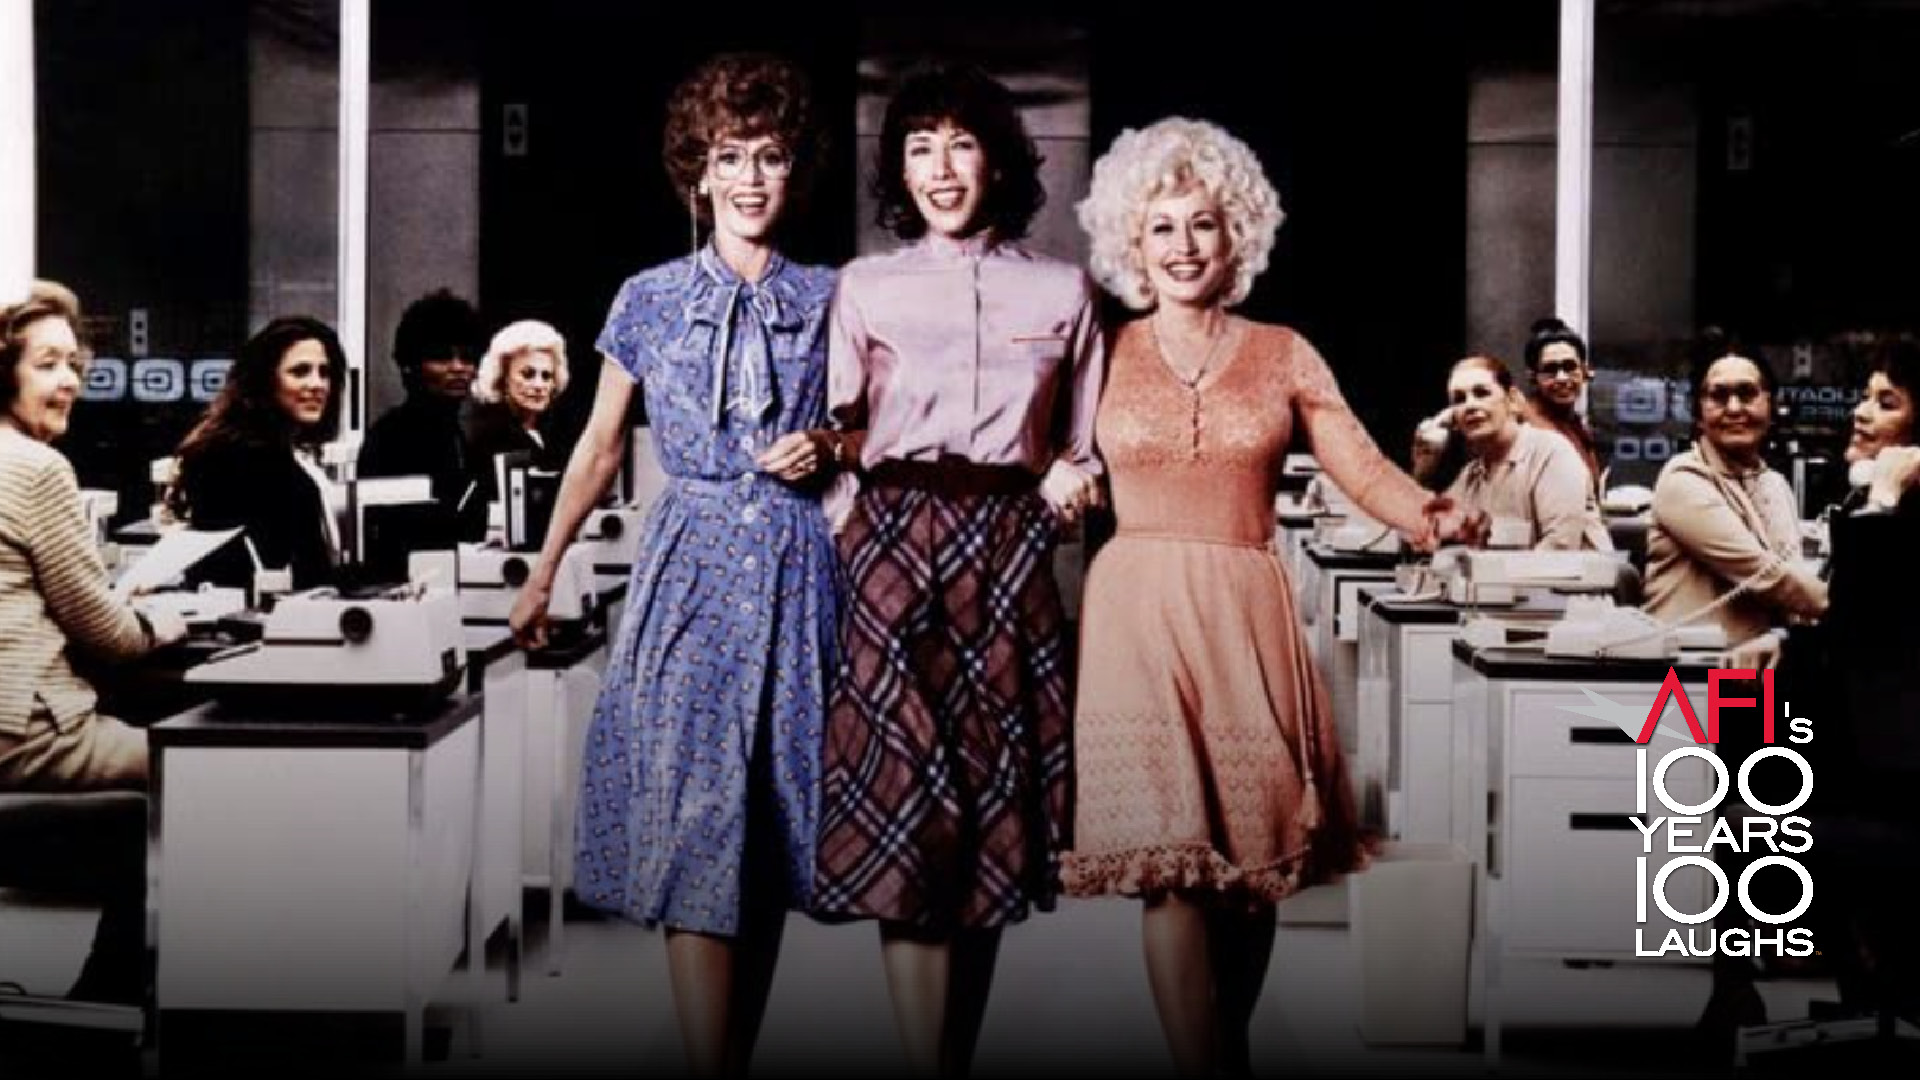 Still image from NINE TO FIVE featuring (L to R) Jane Fonda, Lily Tomlin and Dolly Parton.